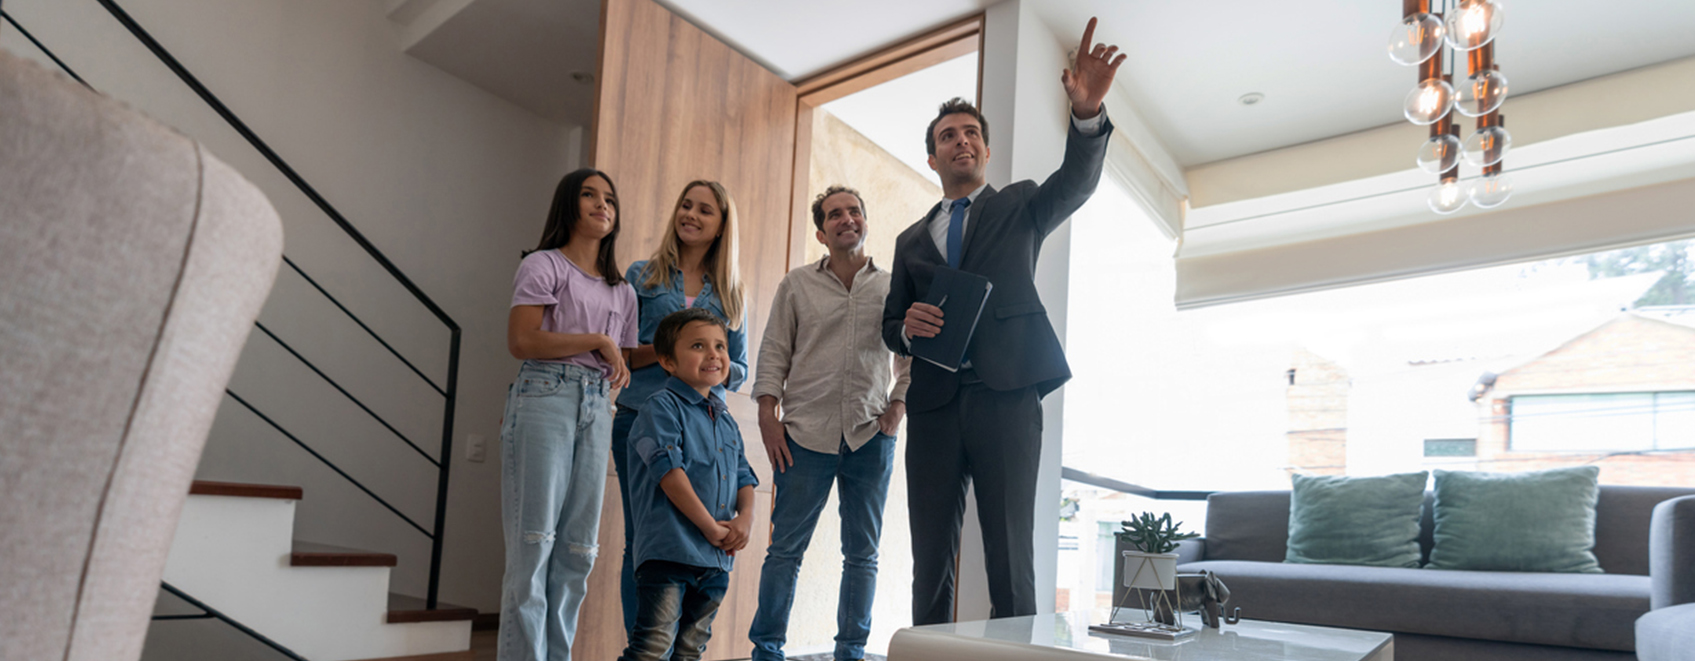 A real estate agent with business insurance showing a house to a family